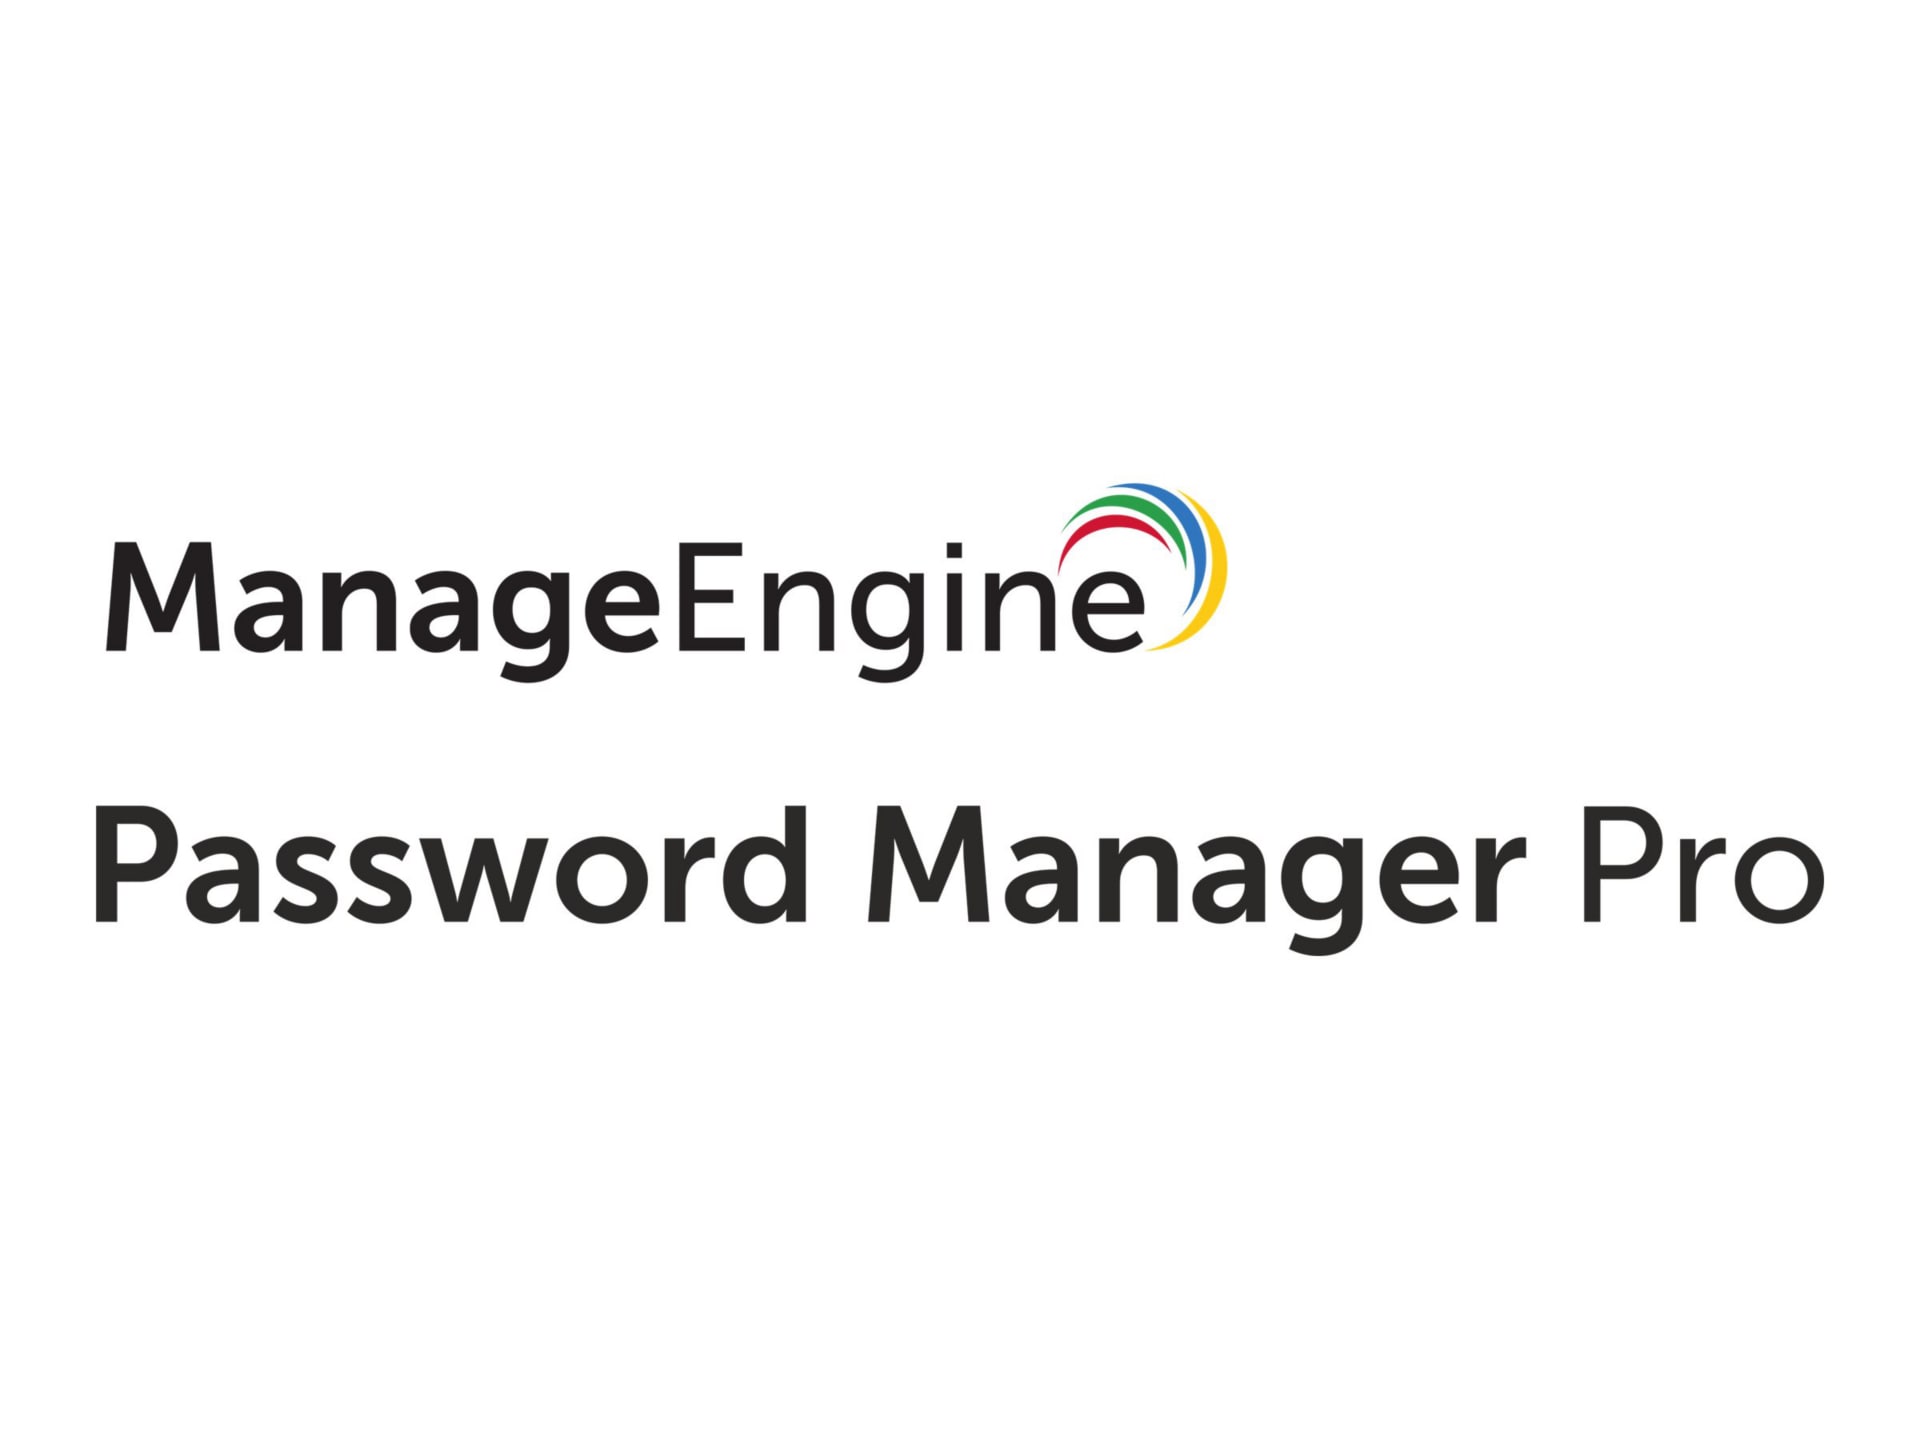 ManageEngine Password Manager Pro Premium Edition (v. 9.x) - subscription license (1 year) - unlimited users, 10